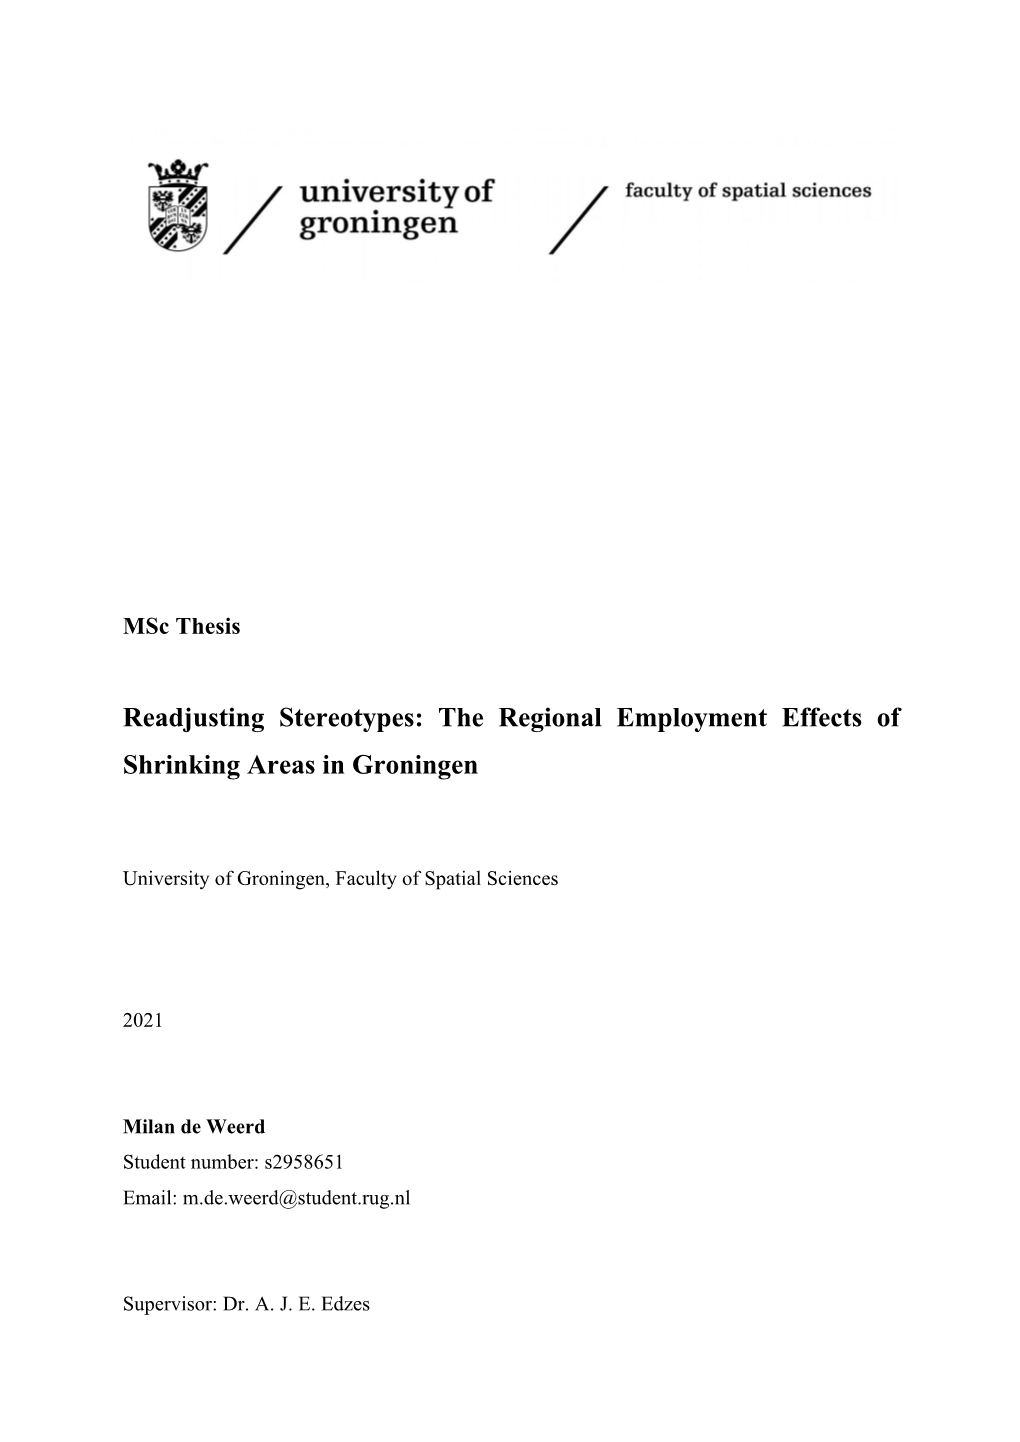 The Regional Employment Effects of Shrinking Areas in Groningen